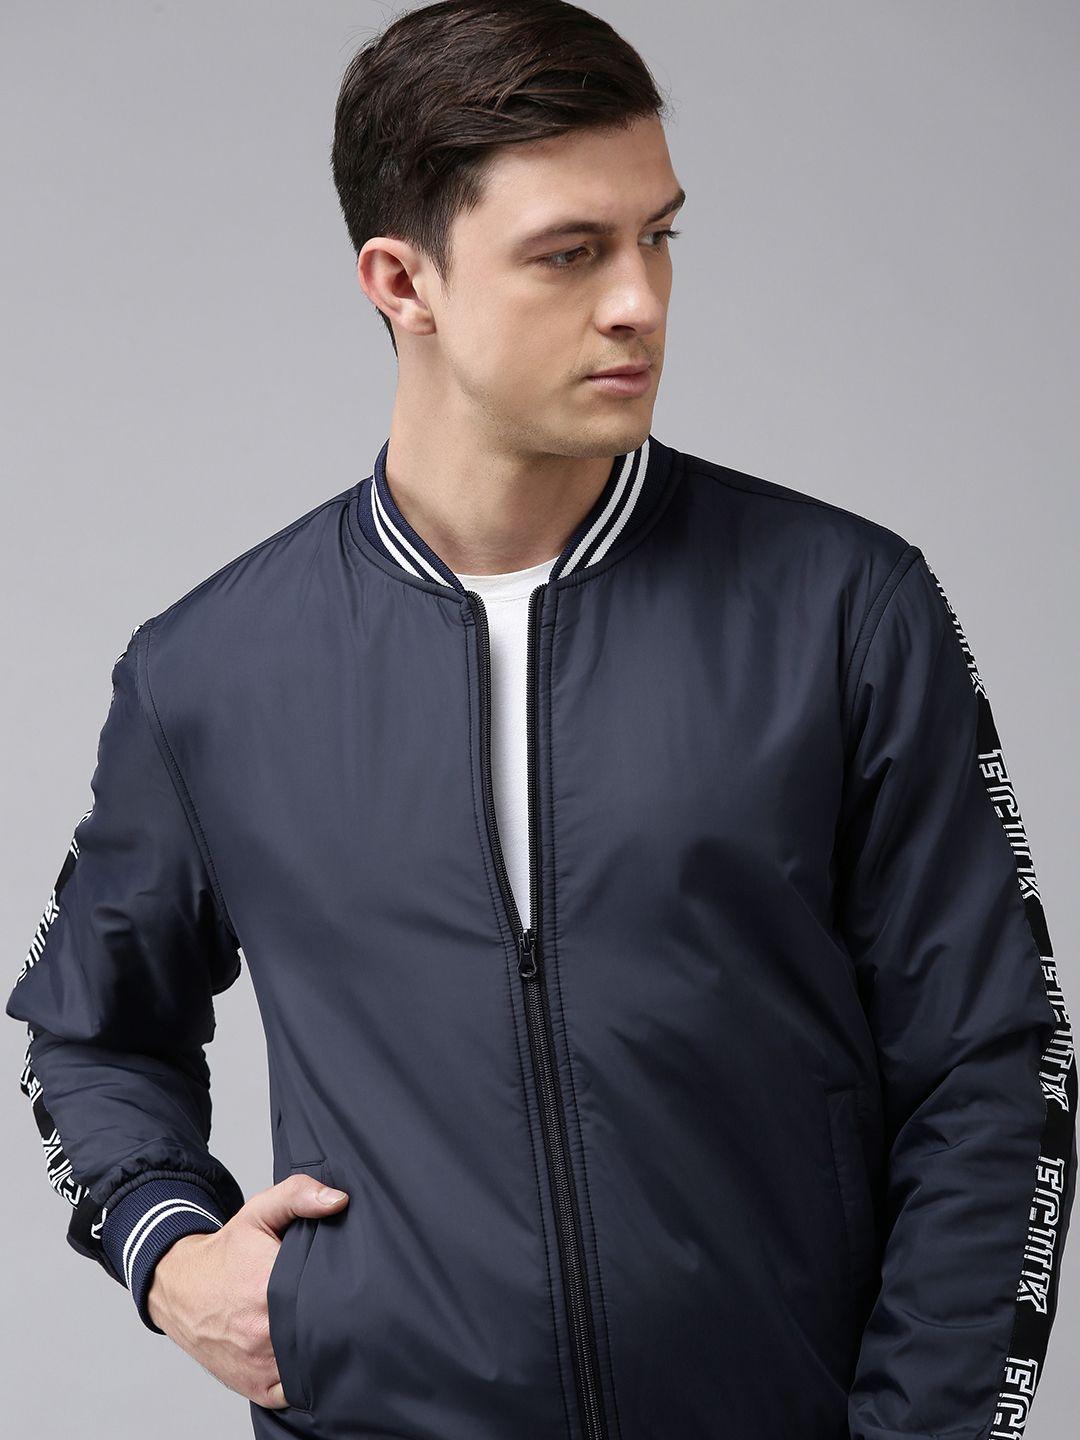 french connection men navy blue solid varsity jacket